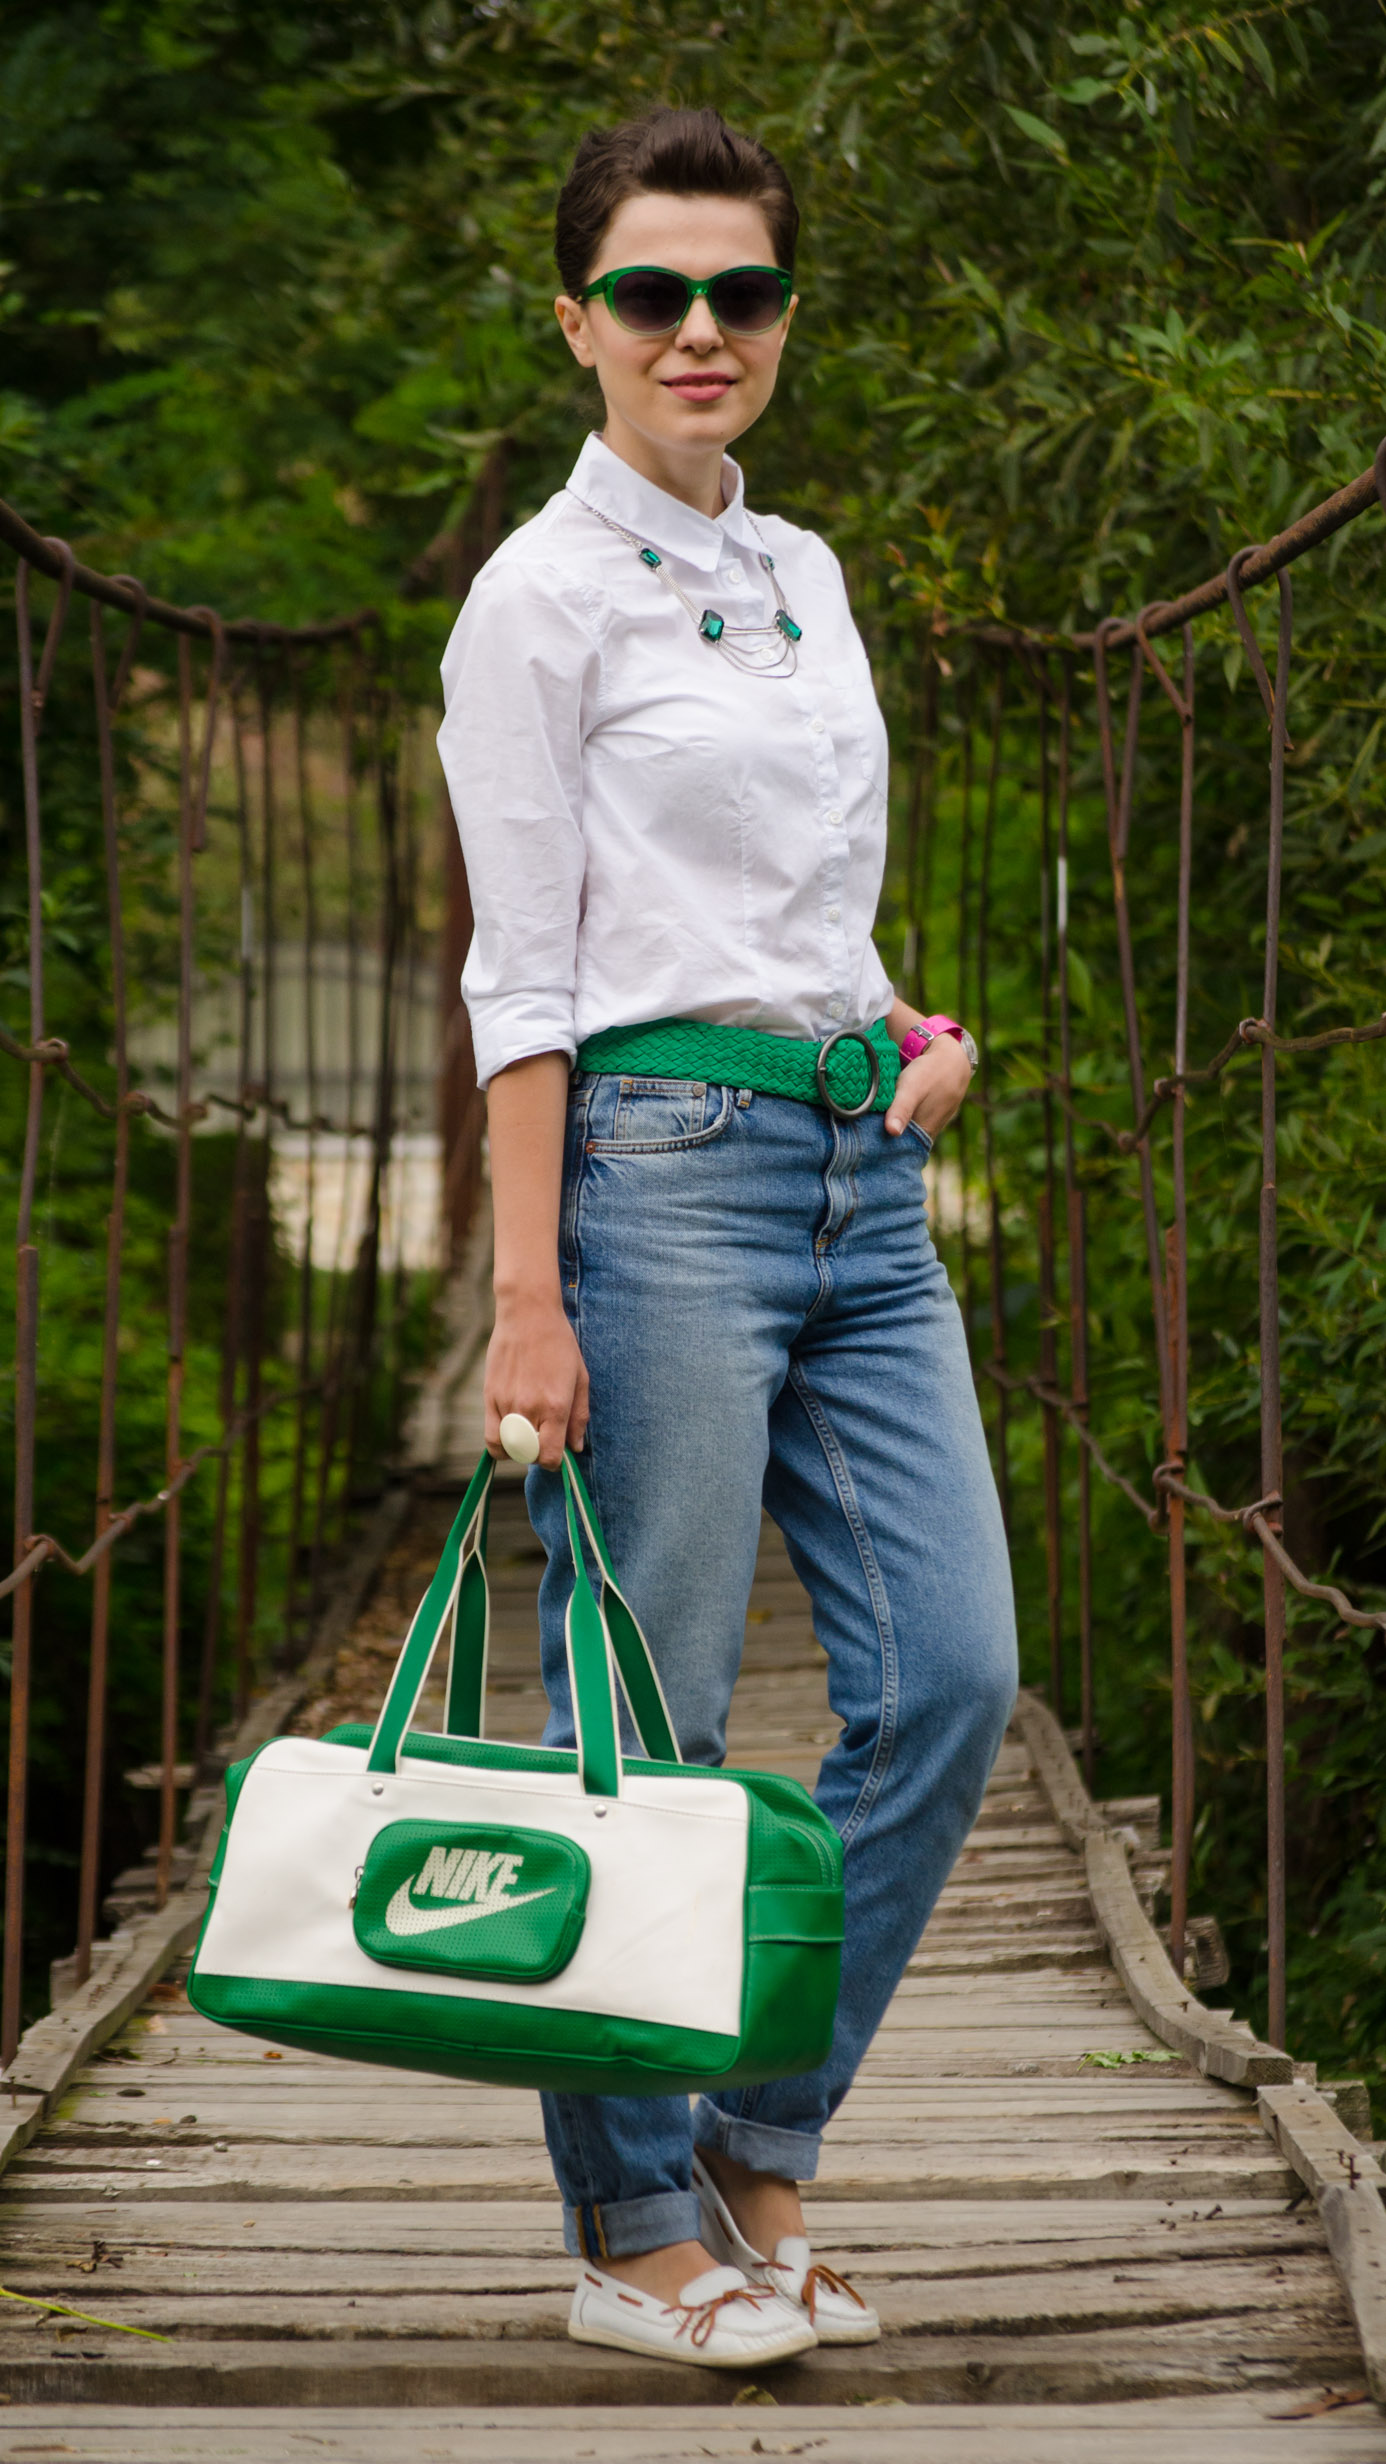 back to school outfit mom jeans white loose boyfriend shirt green belt white loafers nike bag statement necklace emerald green